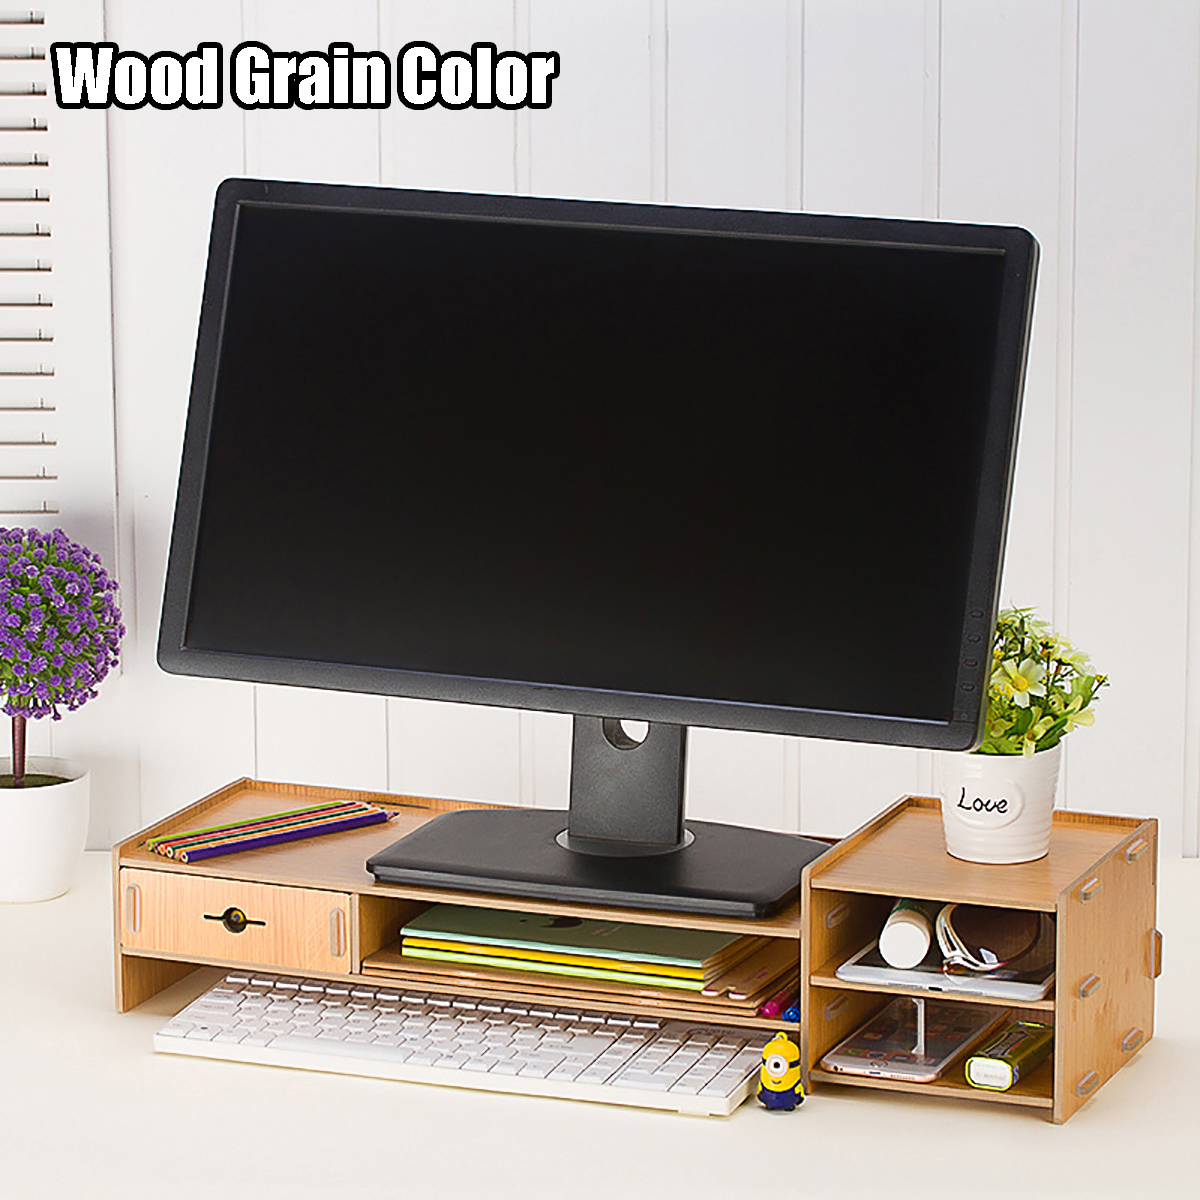 Wooden-Monitor-Stand-Desktop-Computer-Riser-LED-LCD-Monitor-Laptop-Notebook-Support-Stationery-Holde-1757935-2